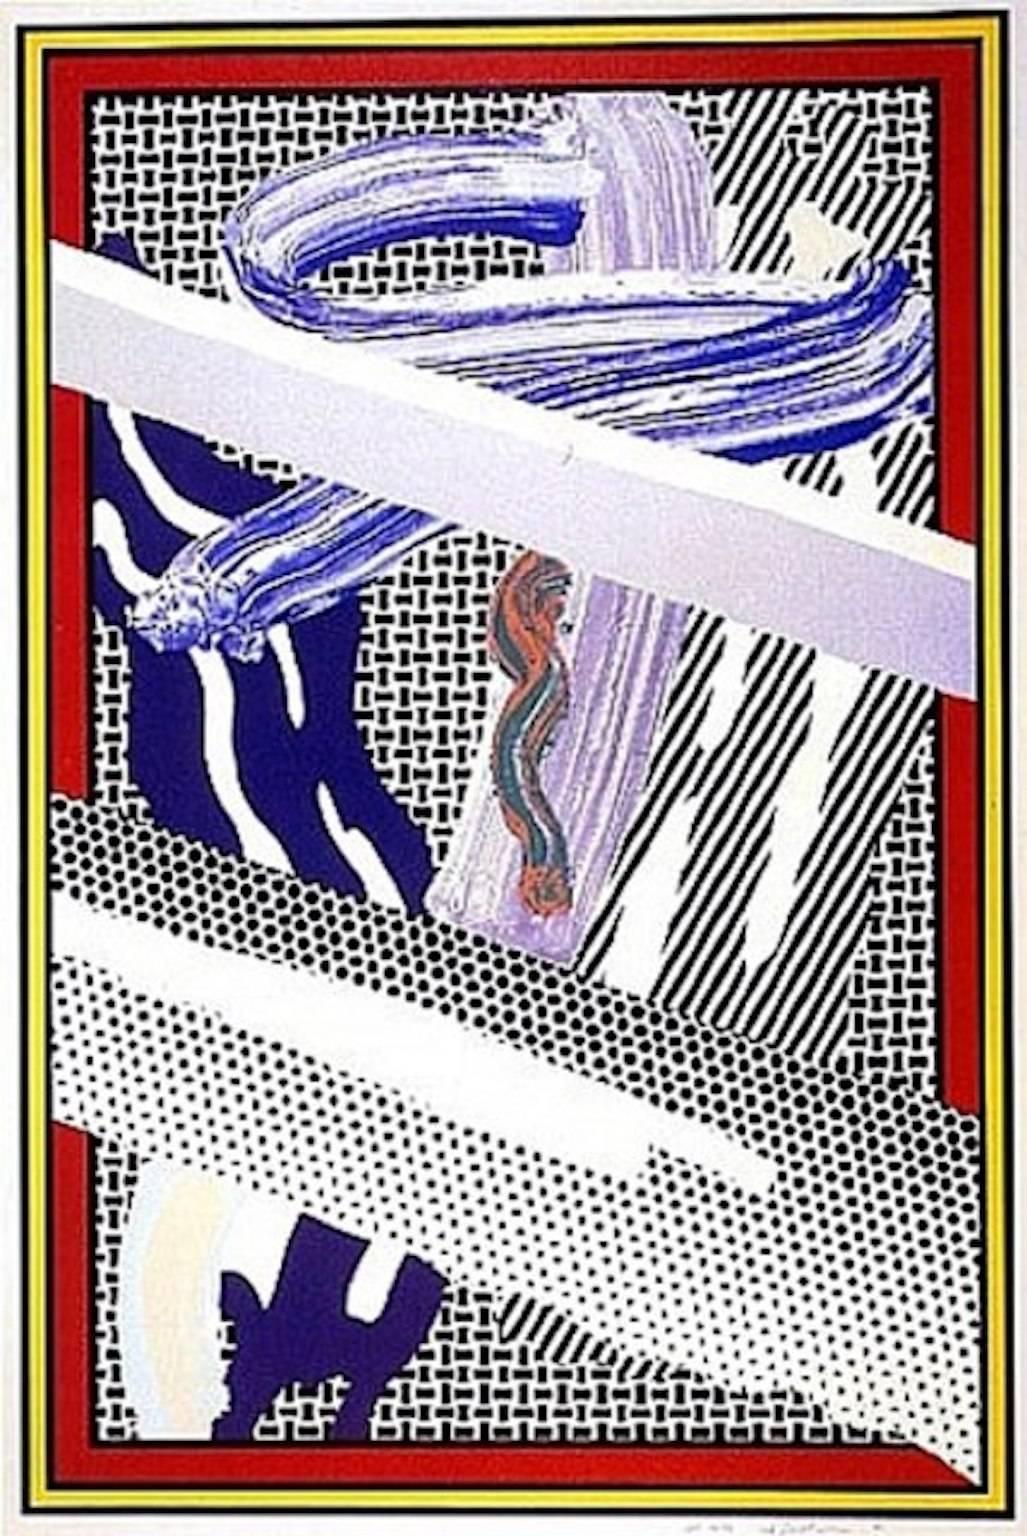 Reflections on an Expressionist Painting - Print by Roy Lichtenstein